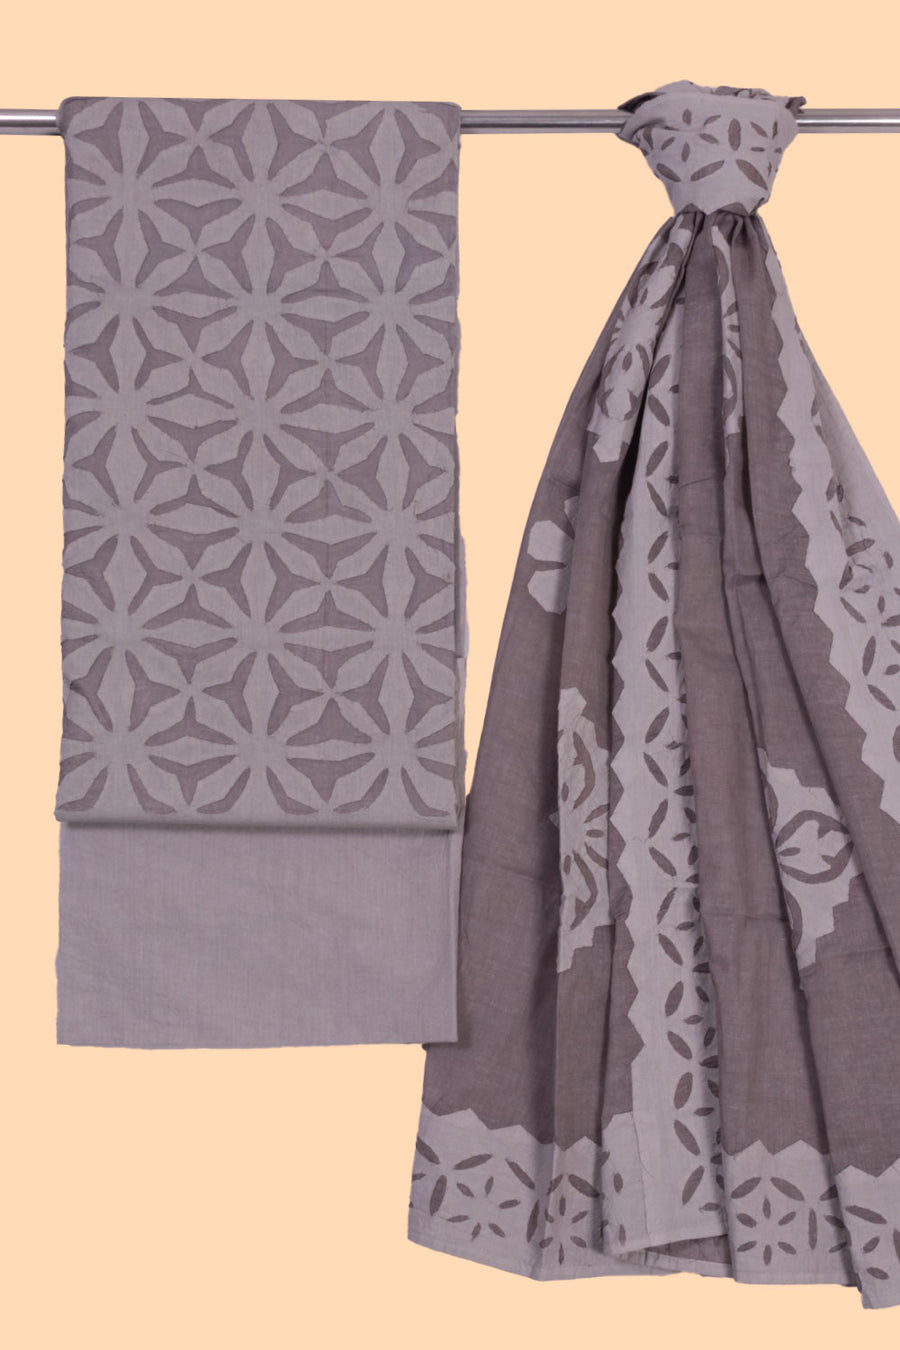 Grey Barmer Applique Embroidered Cotton 3 Piece Salwar Suit Material 10070147